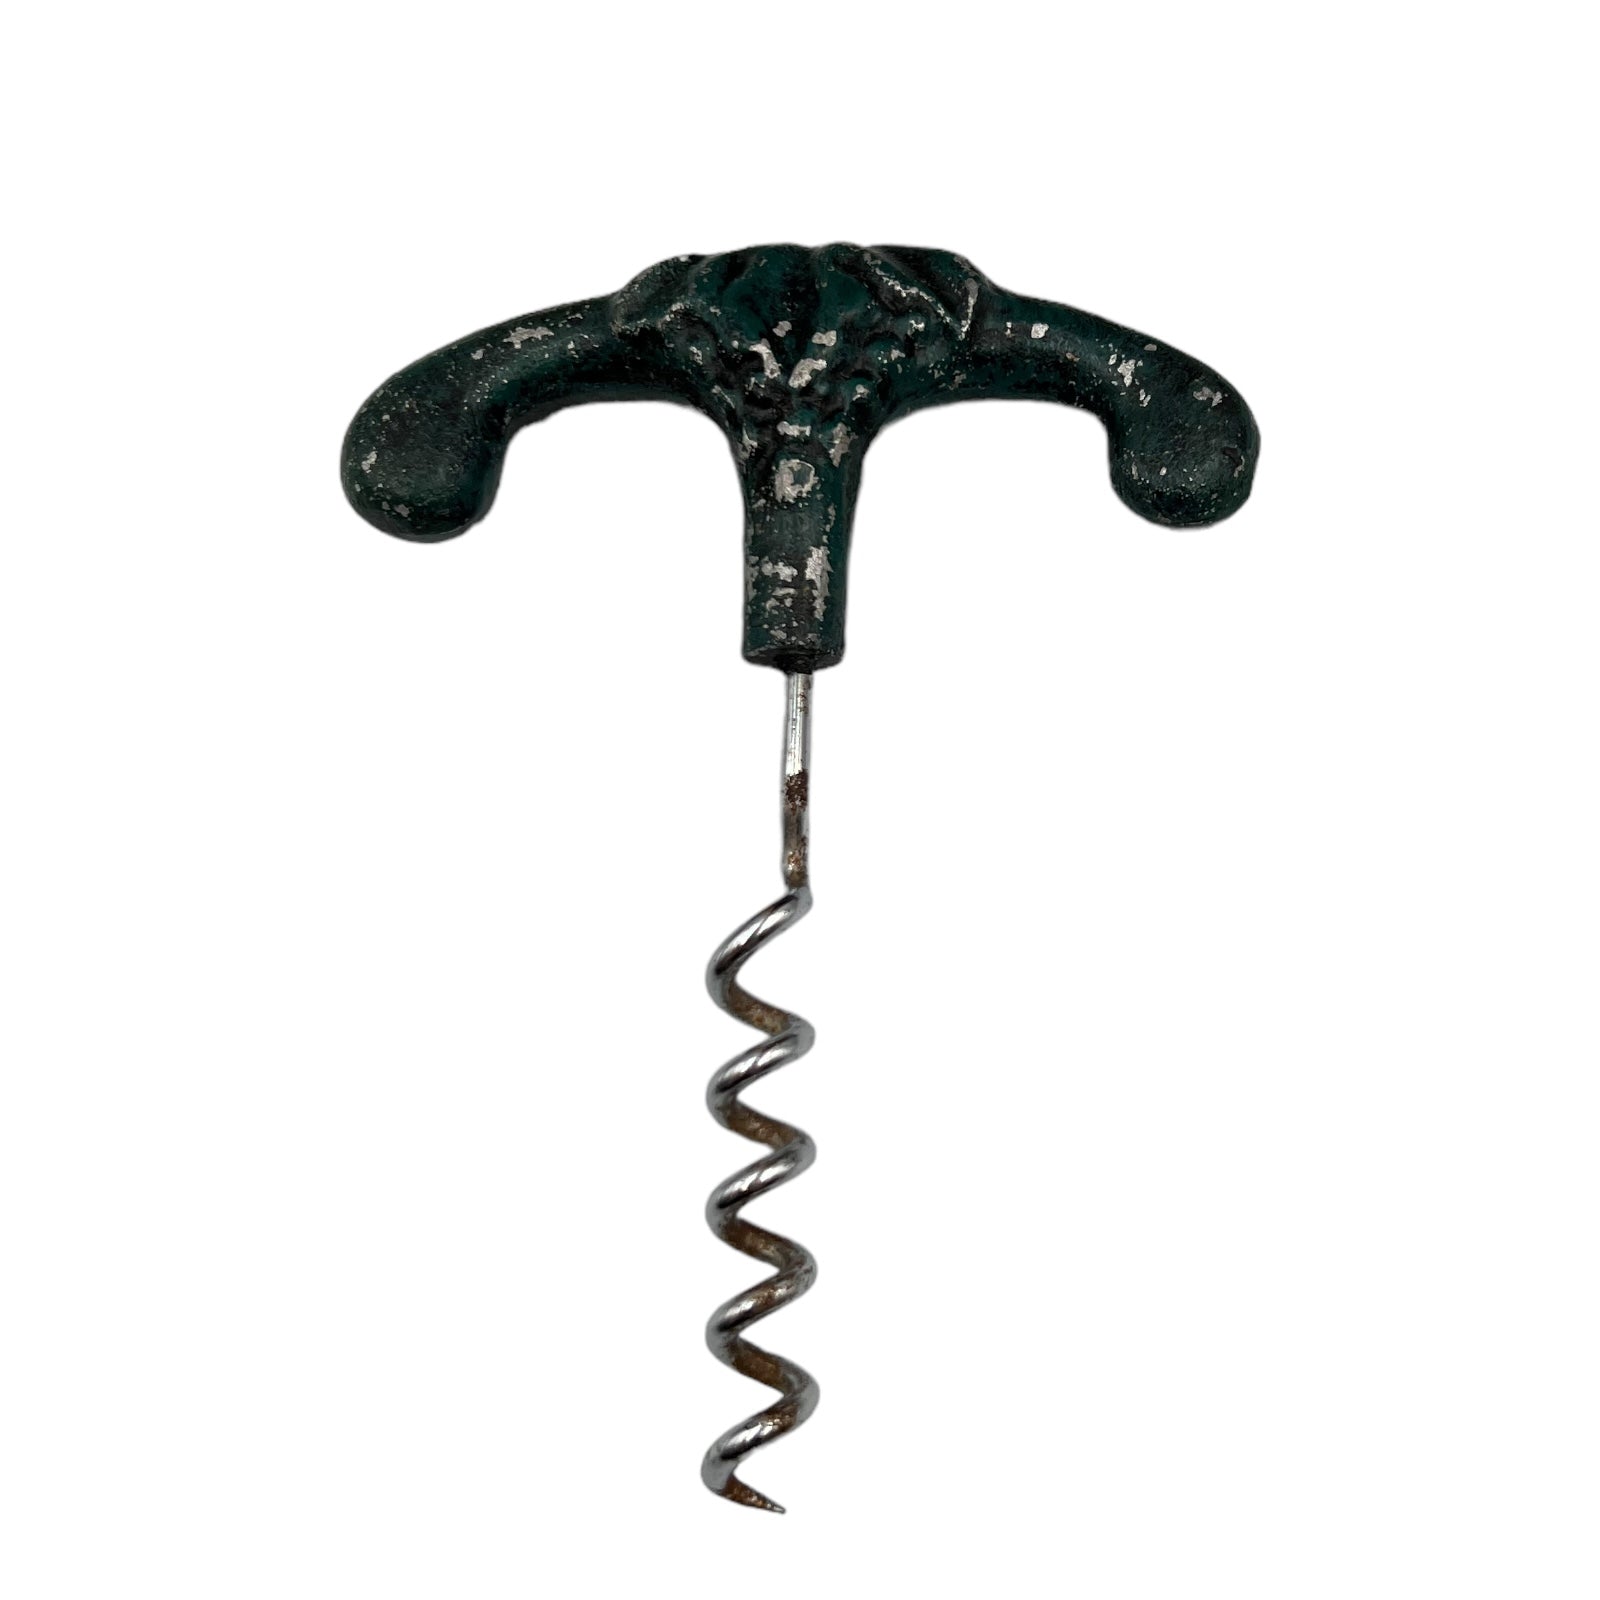 French cast iron wall mounted corkscrew bottle opener